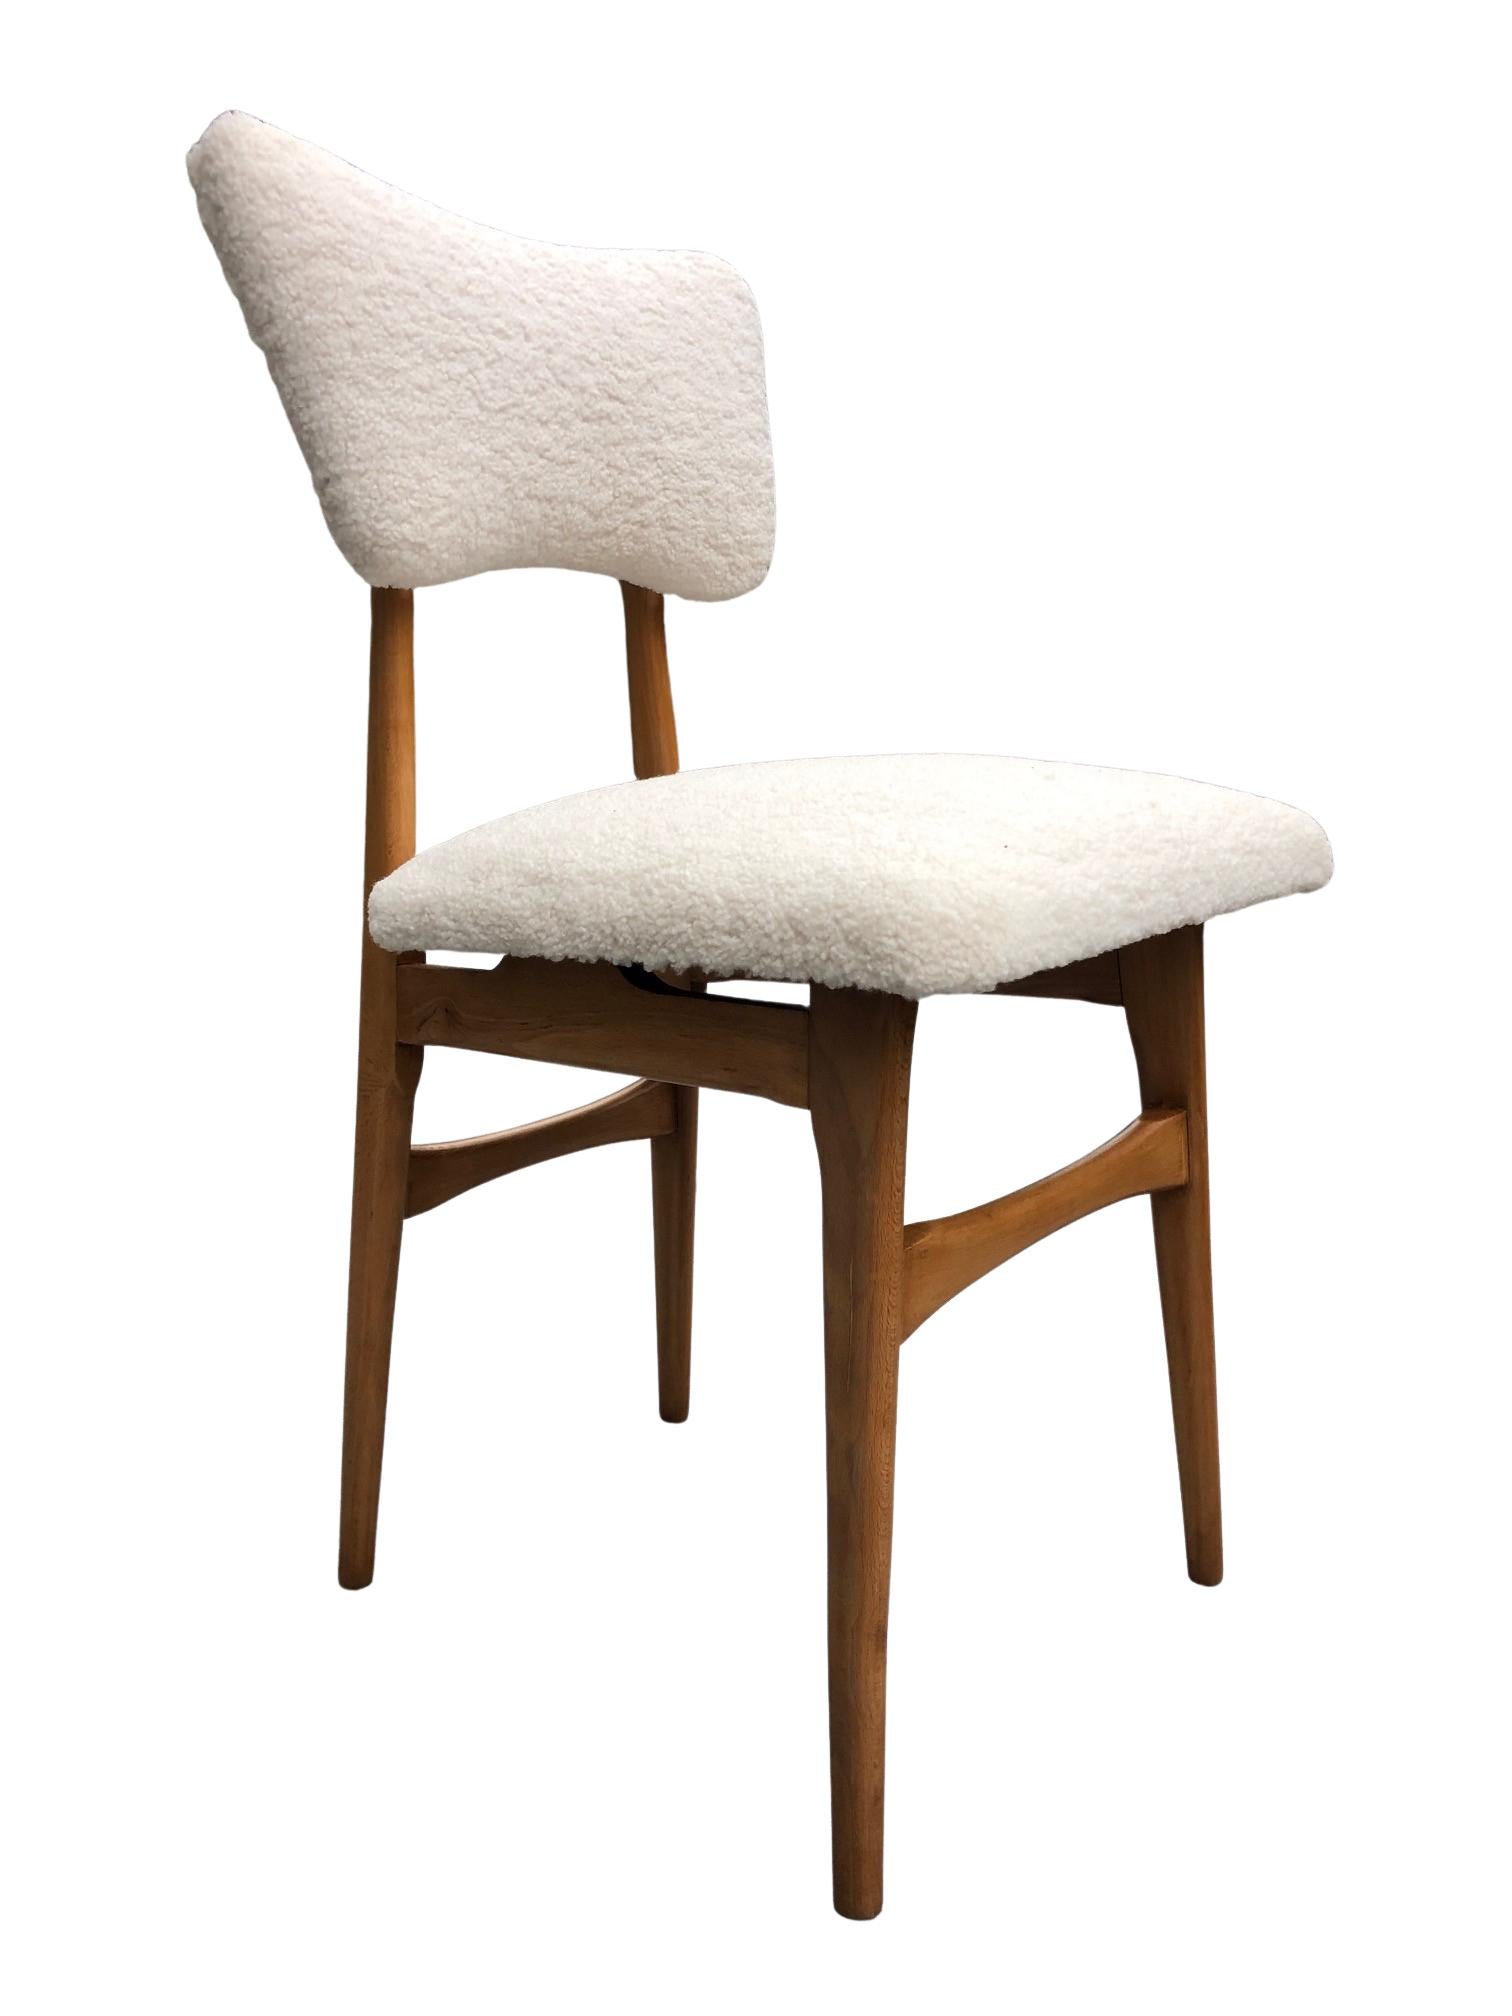 Midcentury Cream Bouclé and Wood Dining Chairs, Europe, 1960s, Set of Two For Sale 7